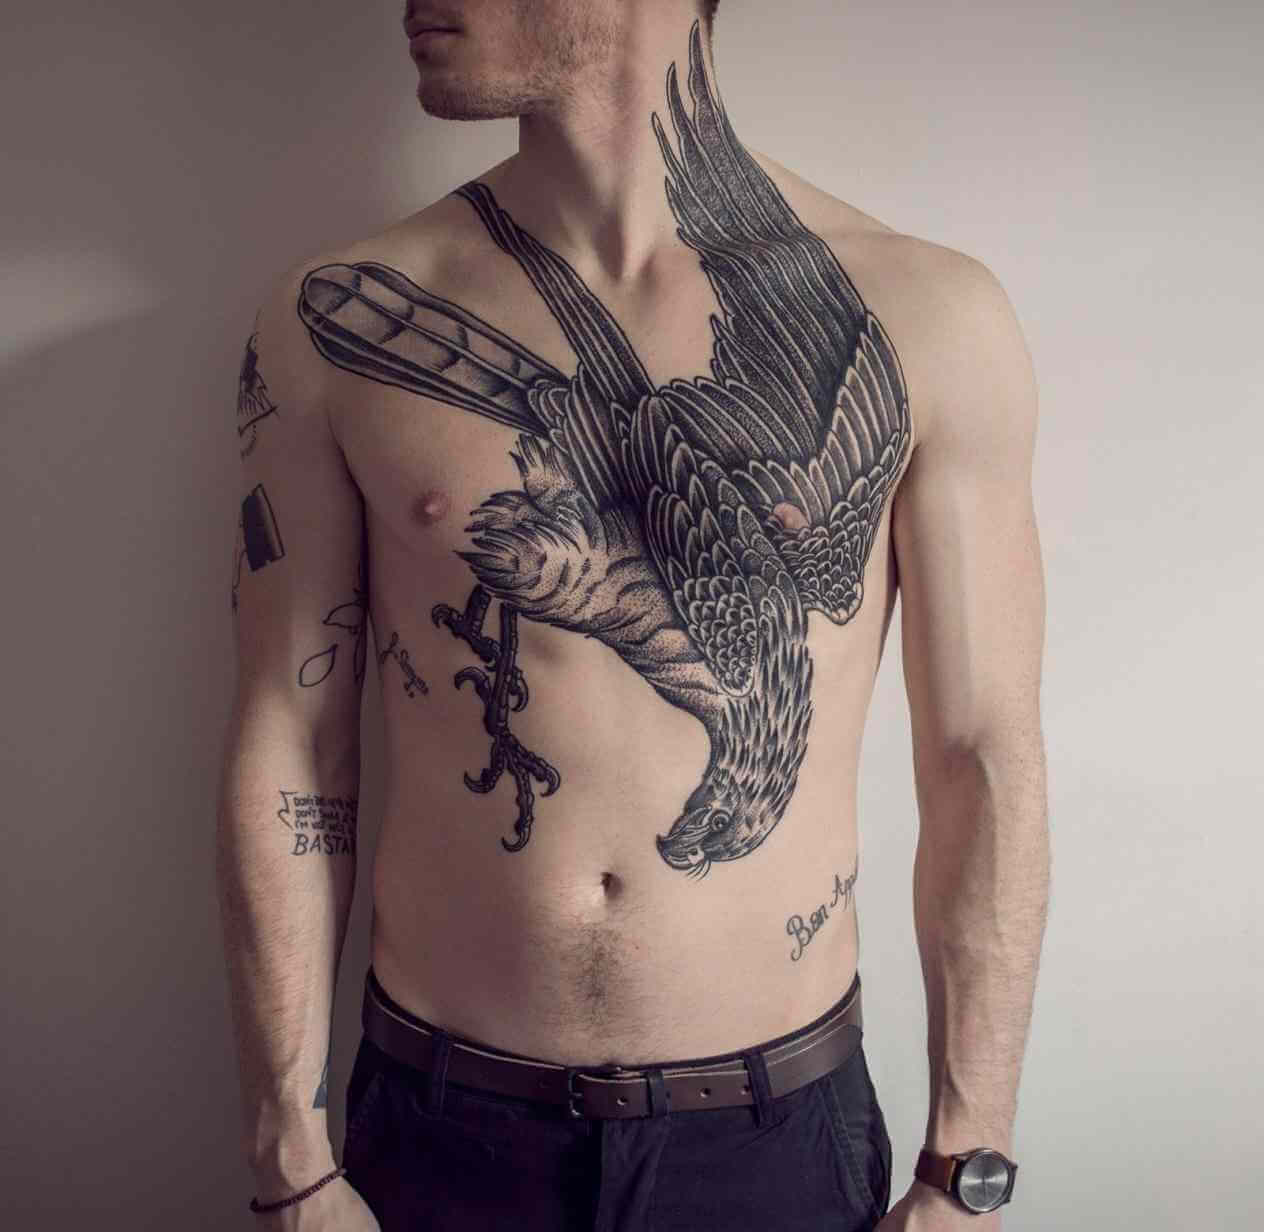 animals-tattoo-male-chest-tattoos-birds-raven-wolf-for-men-animals-best-old-school-images-on-pinterest-eagles-shirts-and-best-male-chest